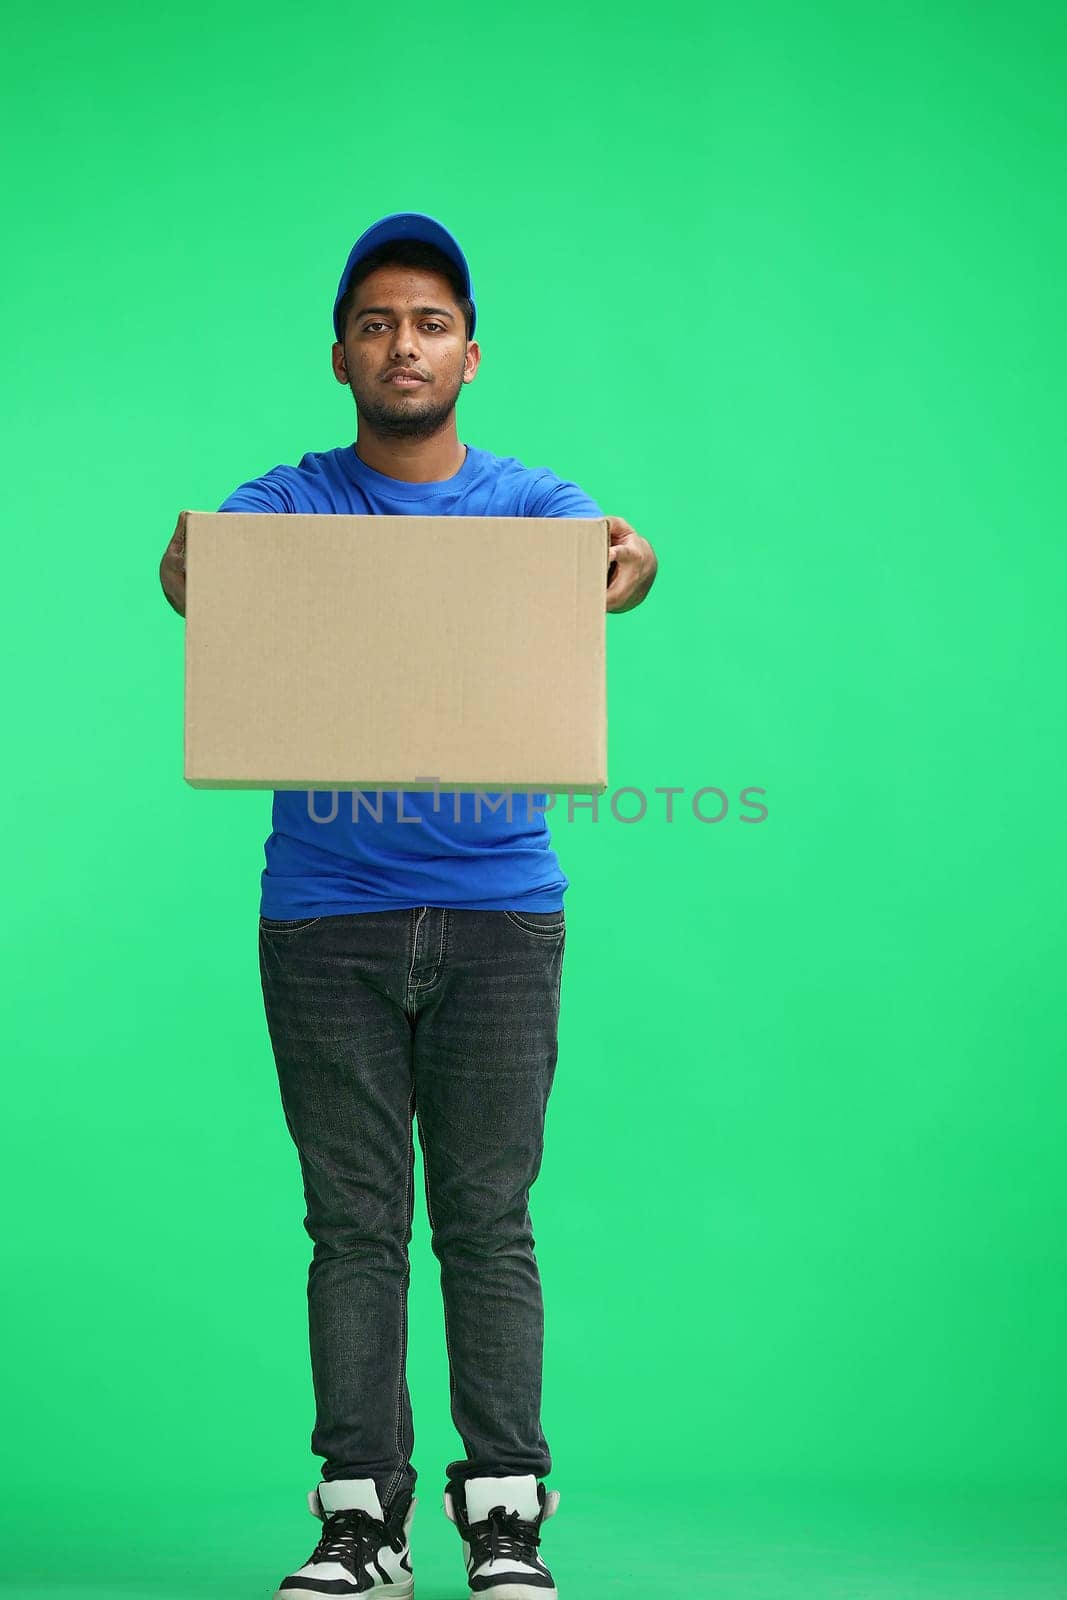 A man on a green background give box by Prosto